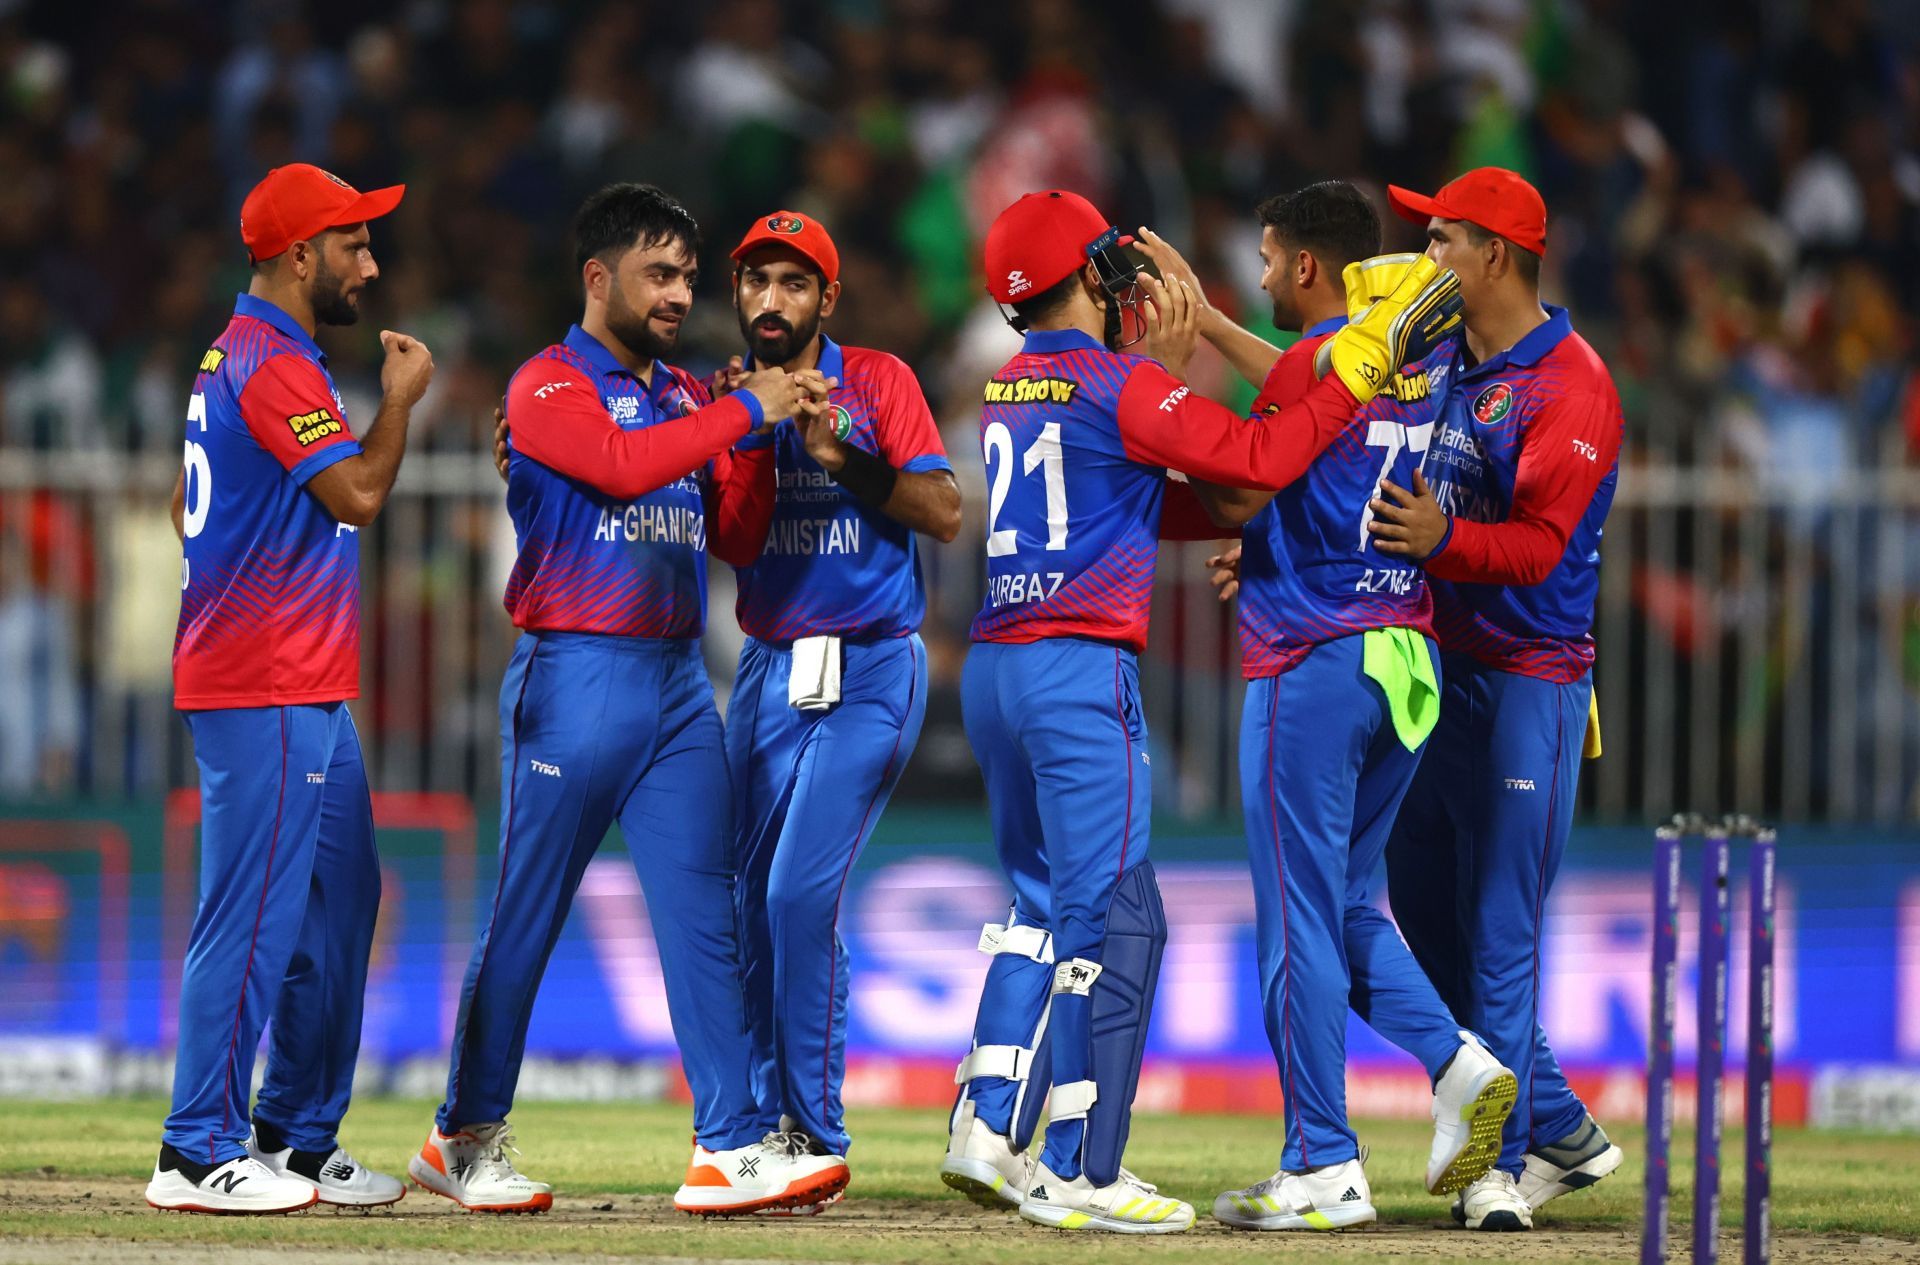 Afghanistan v Pakistan - DP World Asia Cup (Image: Getty)